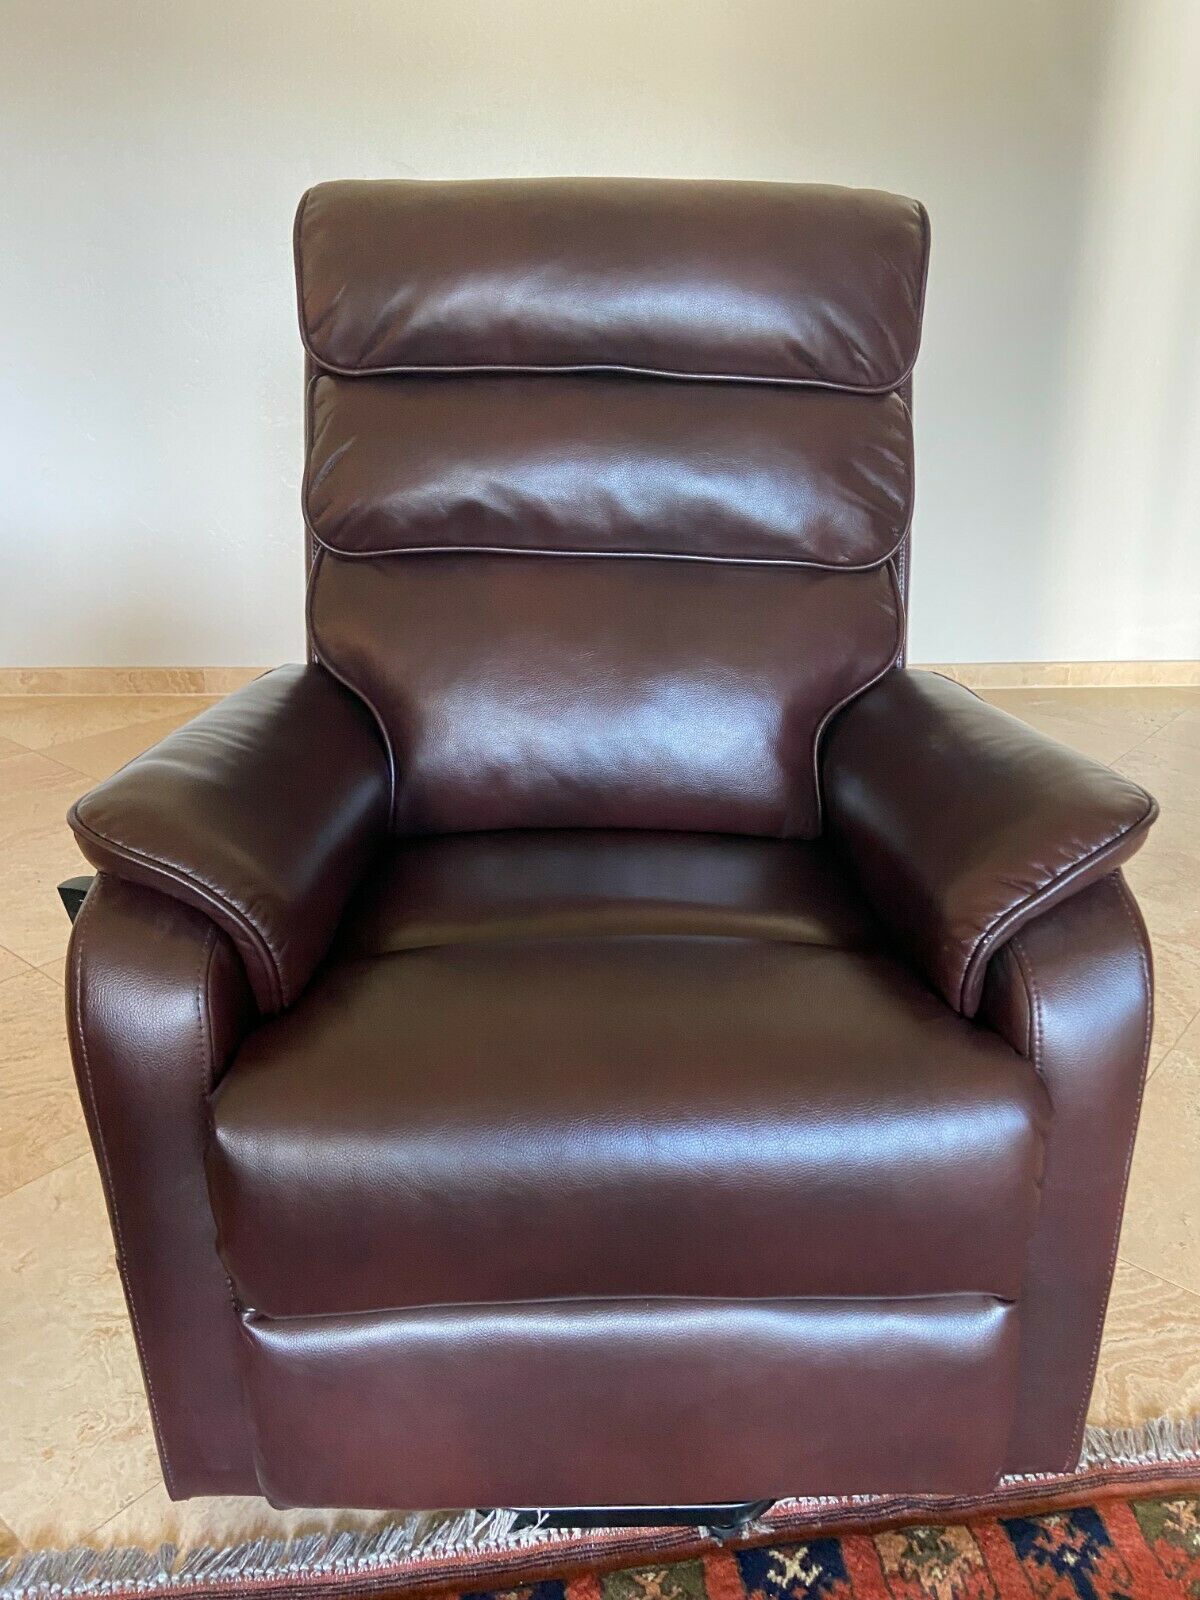 Brand New: Medical Lift Chair. Hand Held Control. Must Go Now! 7/30-7/31!